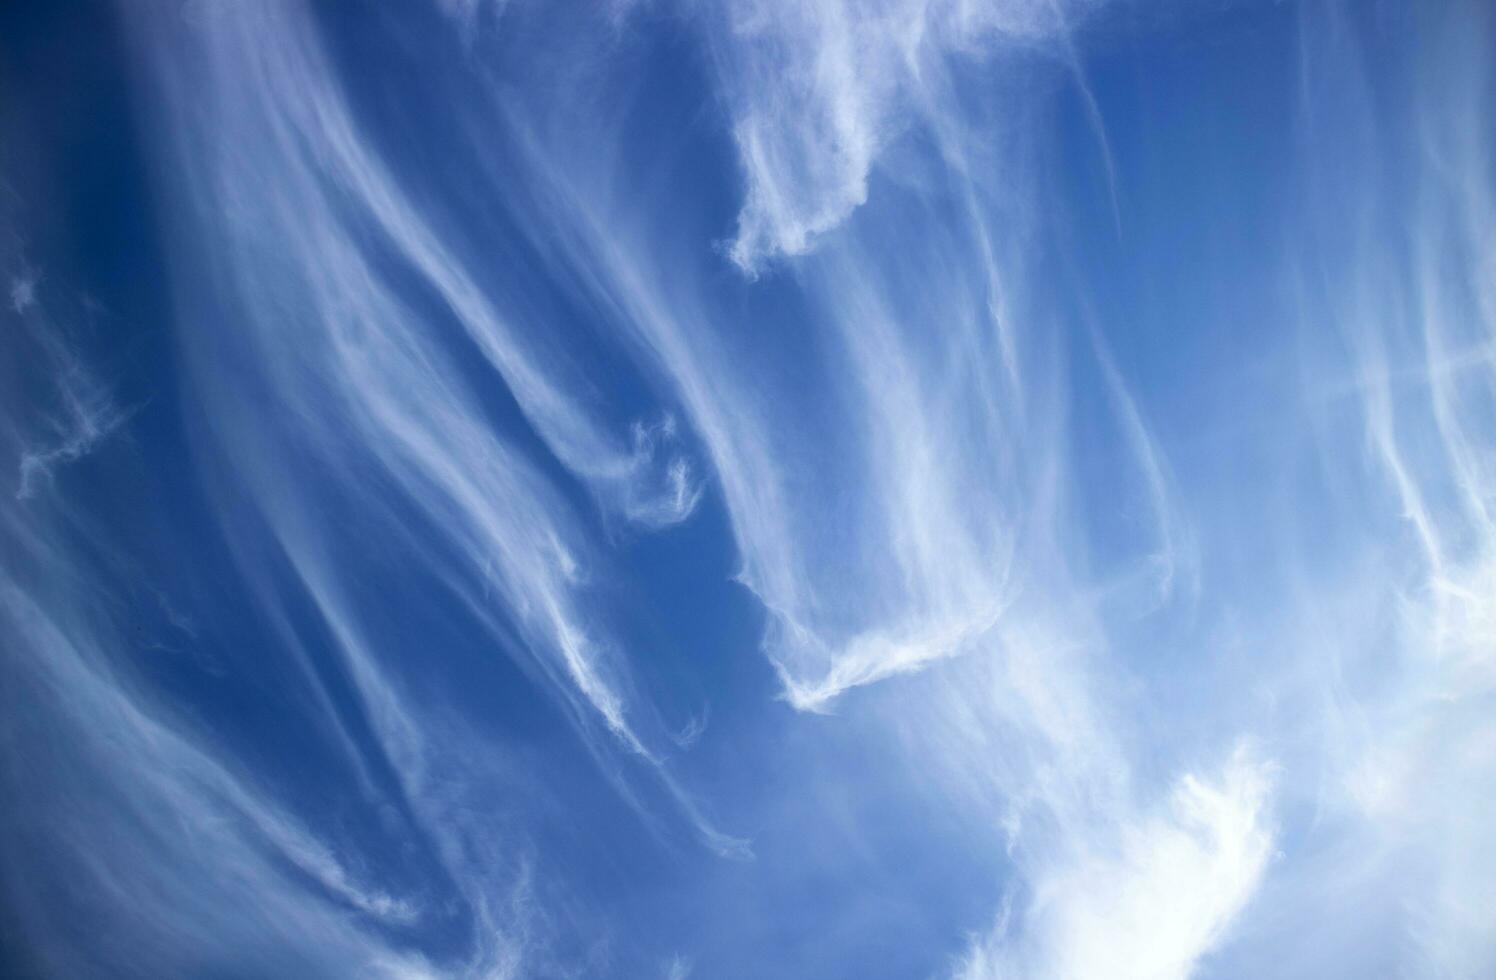 Layers of white clouds in blue sky photo